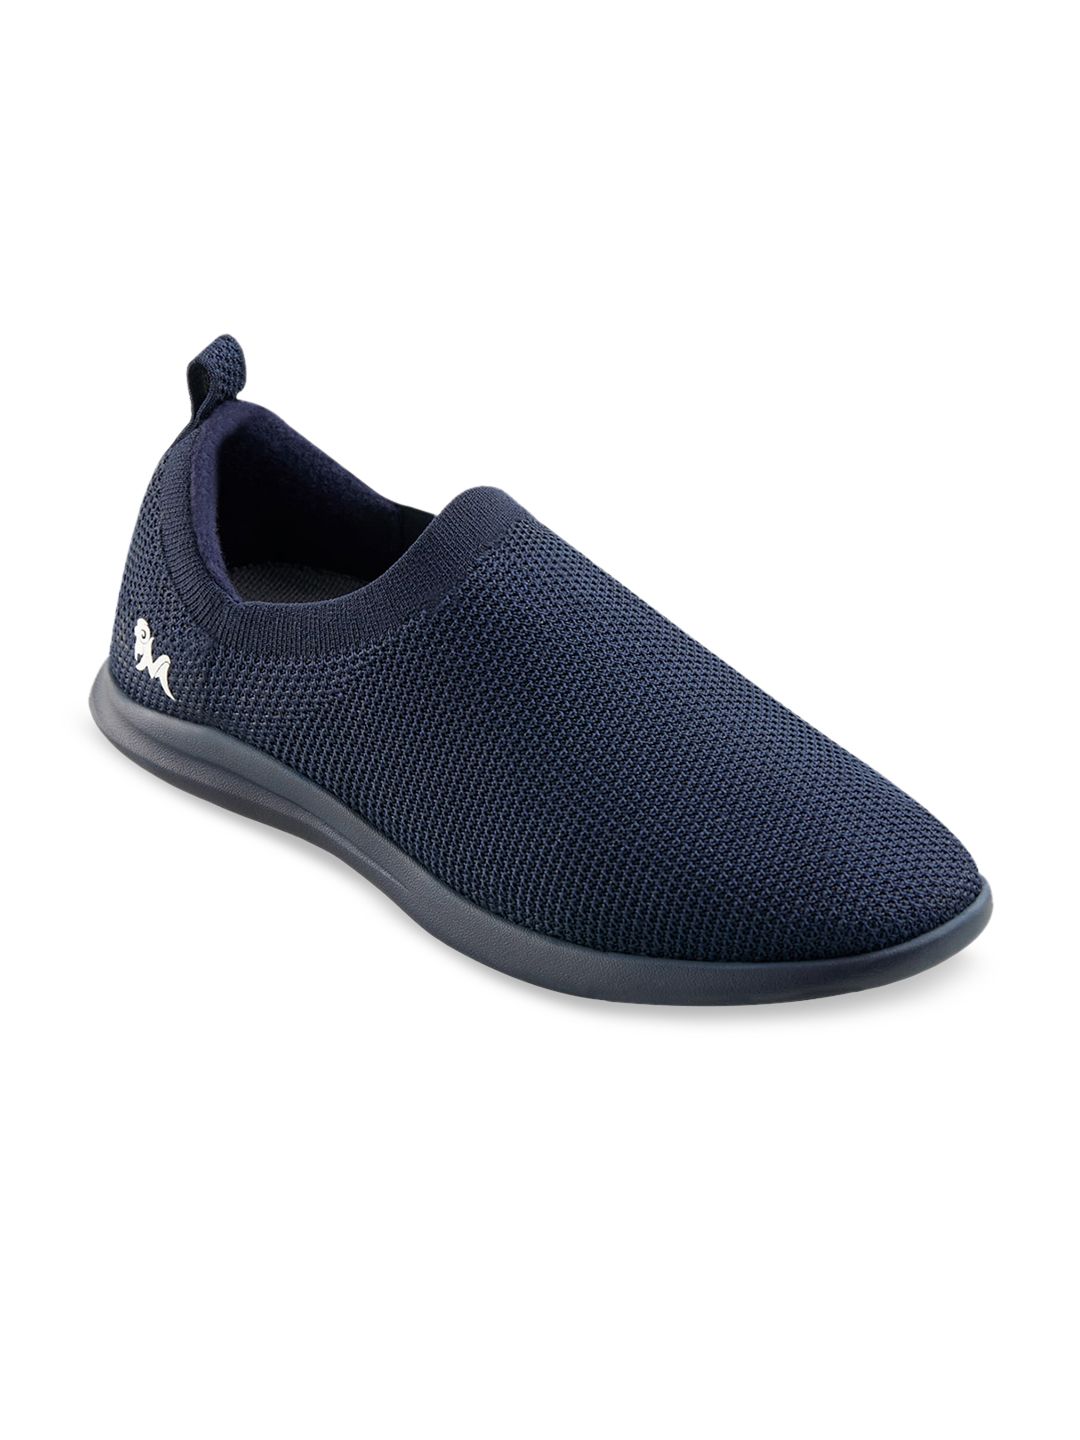 NEEMANS Unisex Navy Blue Re-Live Knit Slip-On Sneakers Price in India